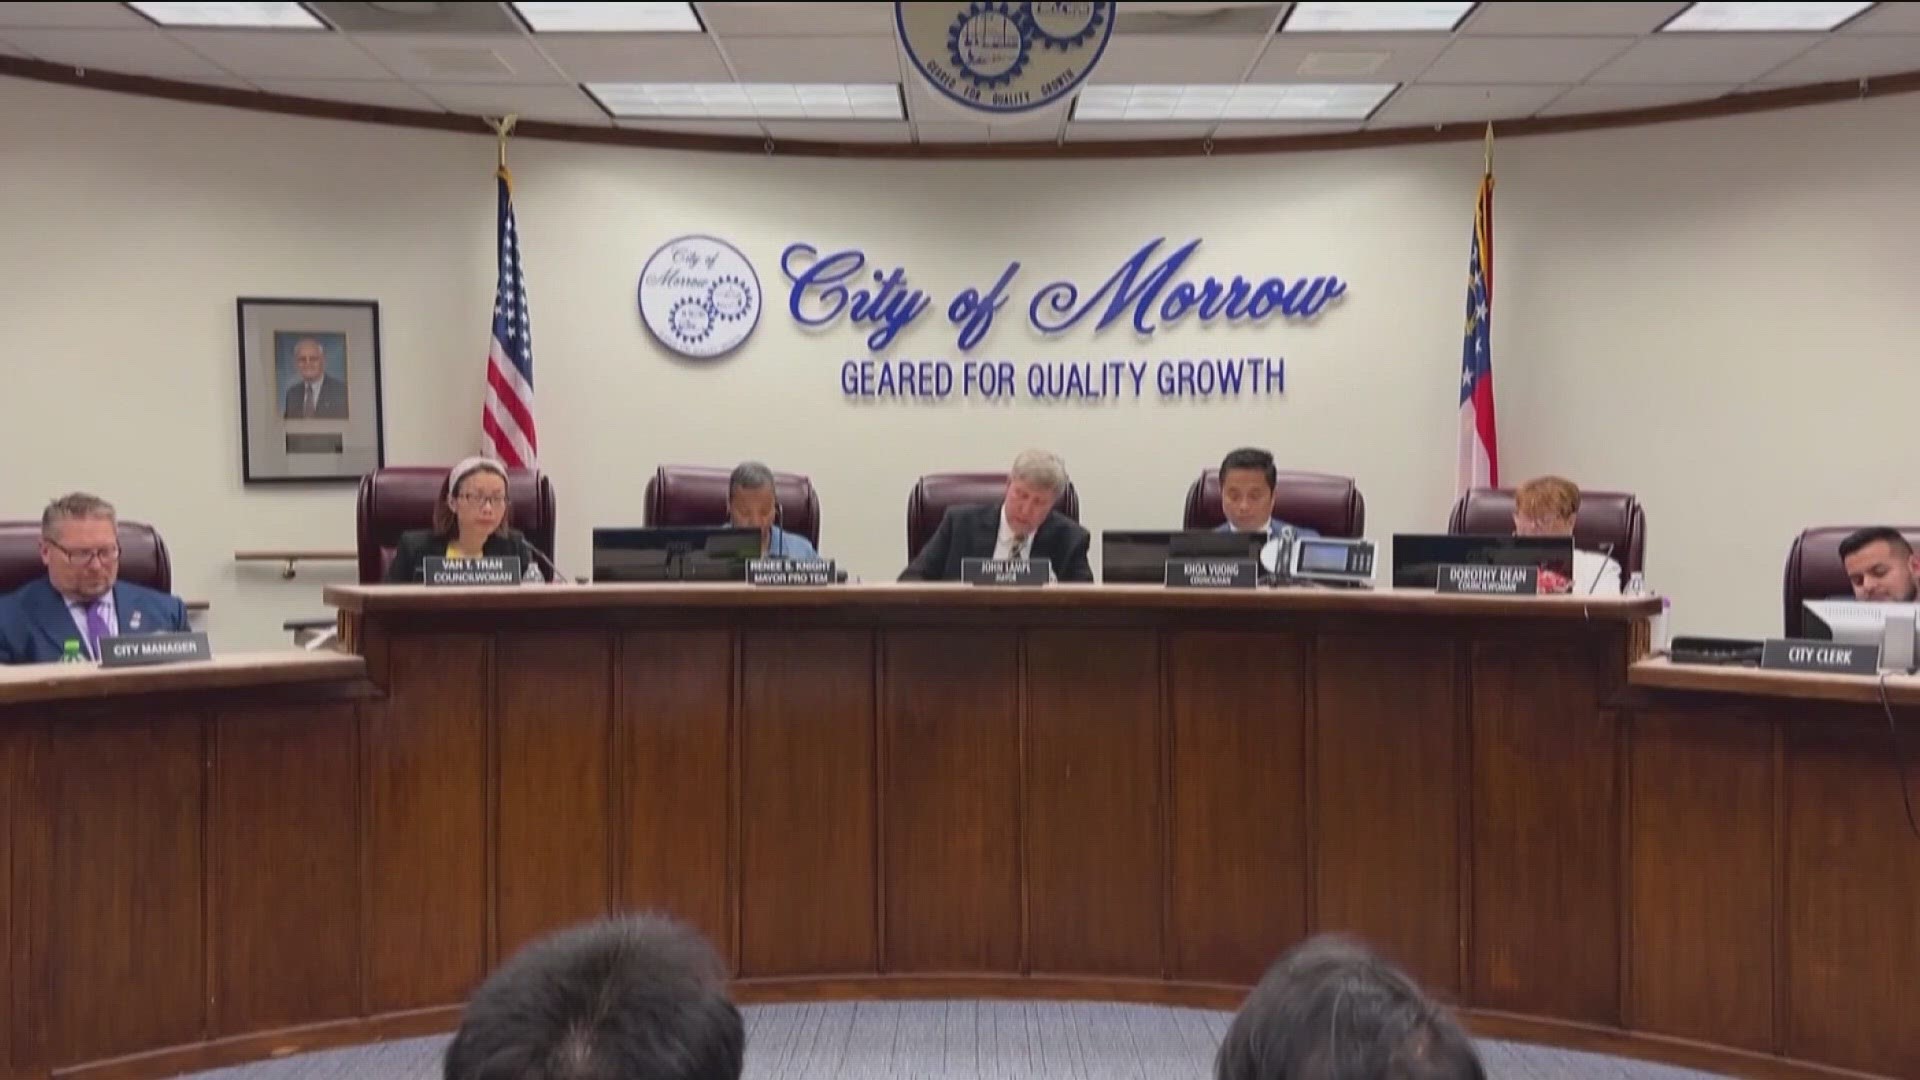 City leaders decided to cancel a referendum and enact an ordinance instead at an August 22 meeting.